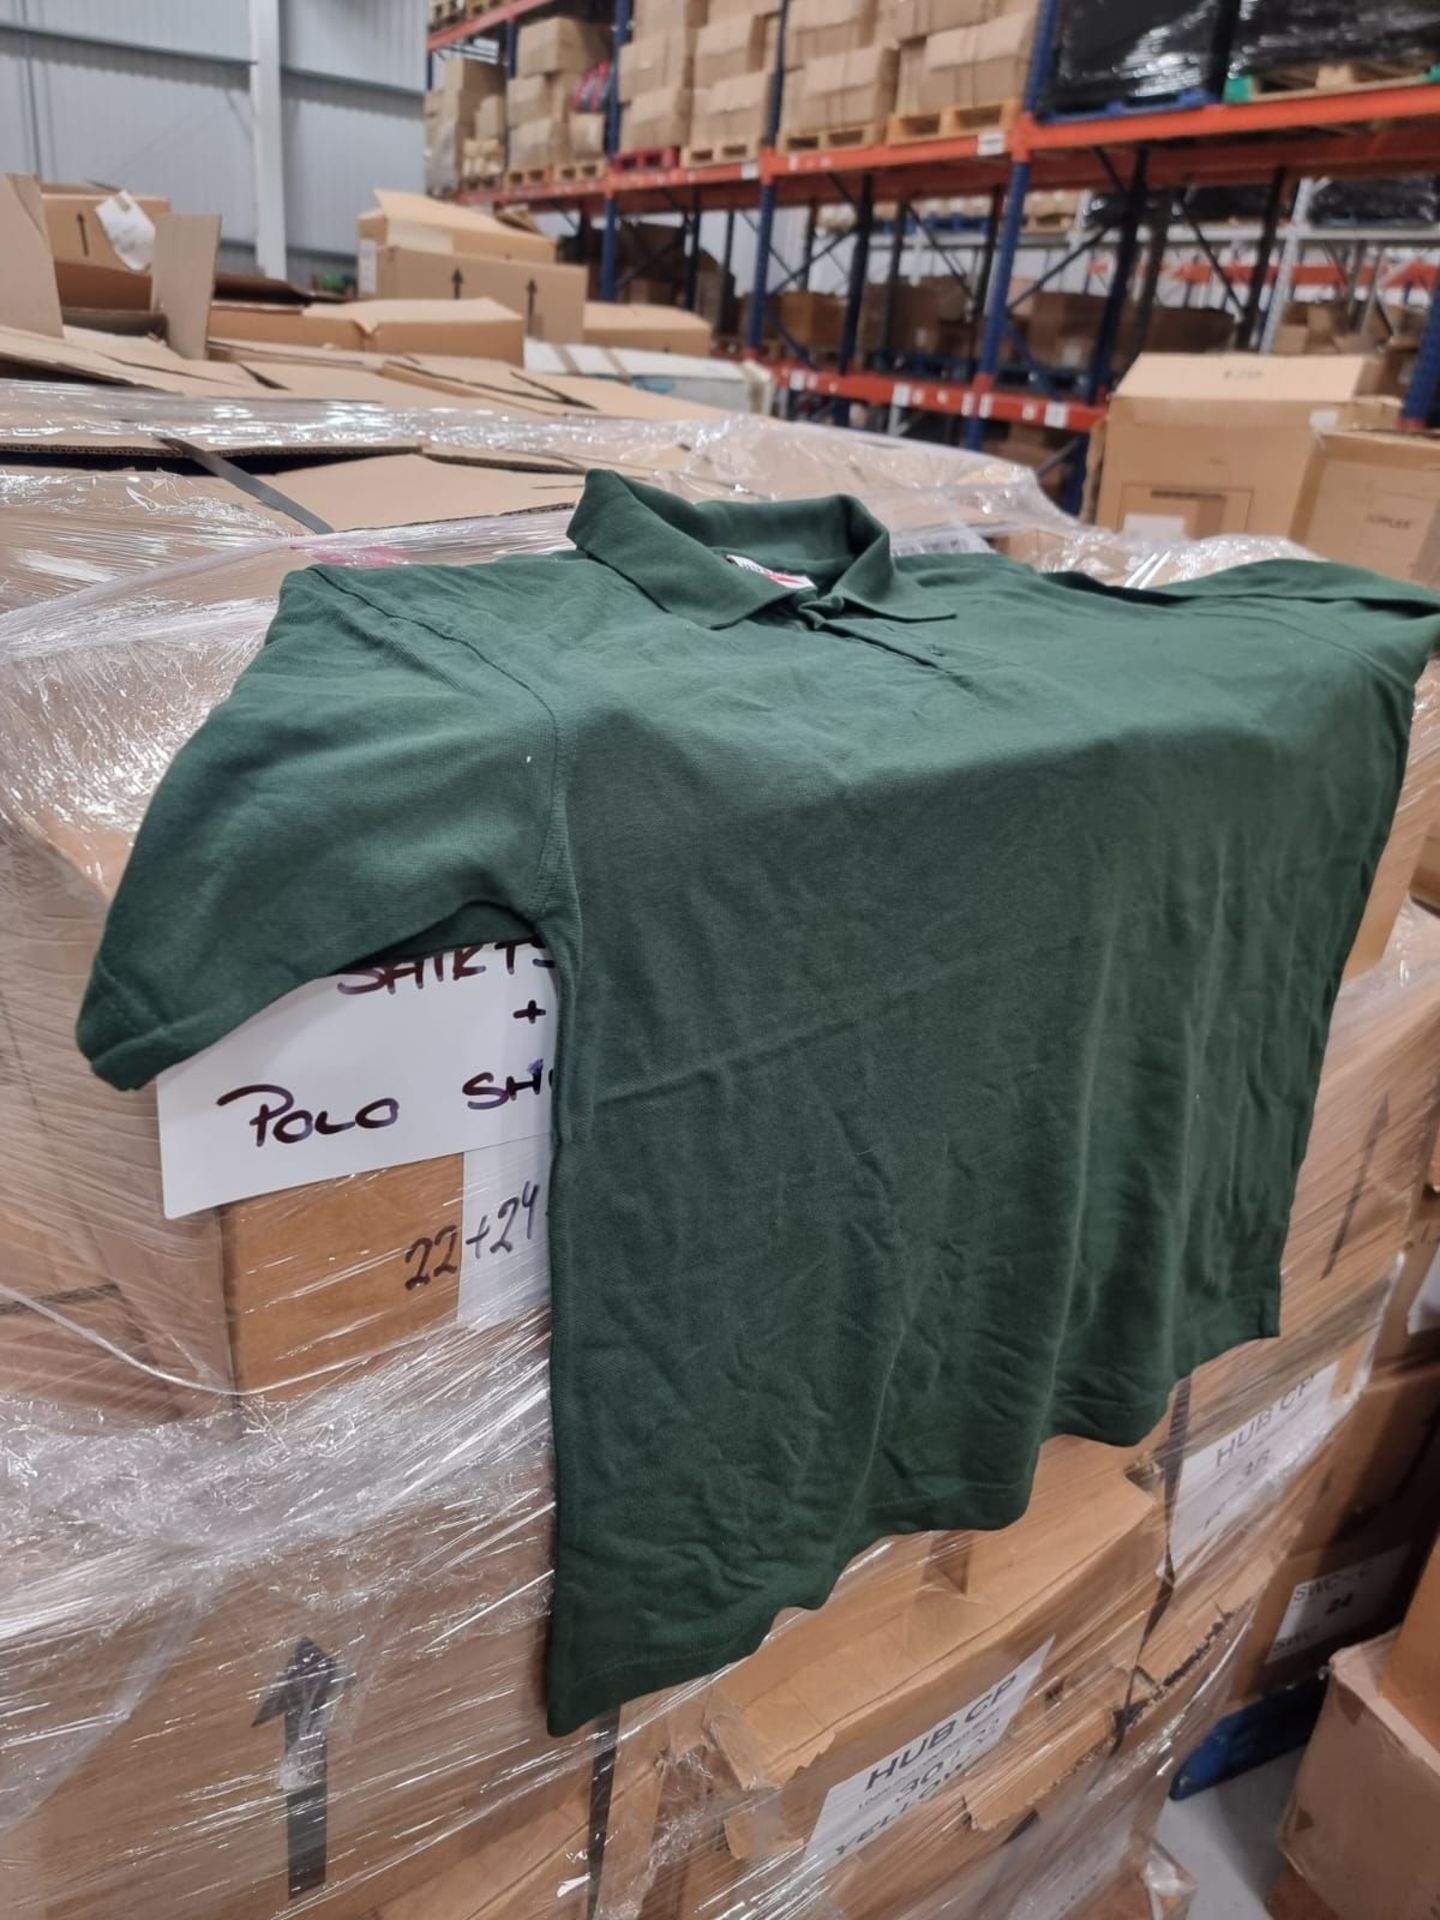 PALLET TO CONTAIN A LARGE QUANTITY OF NEW CLOTHING GOODS. MAY INCLUDE ITEMS SUCH AS: T-SHIRTS, - Image 16 of 28